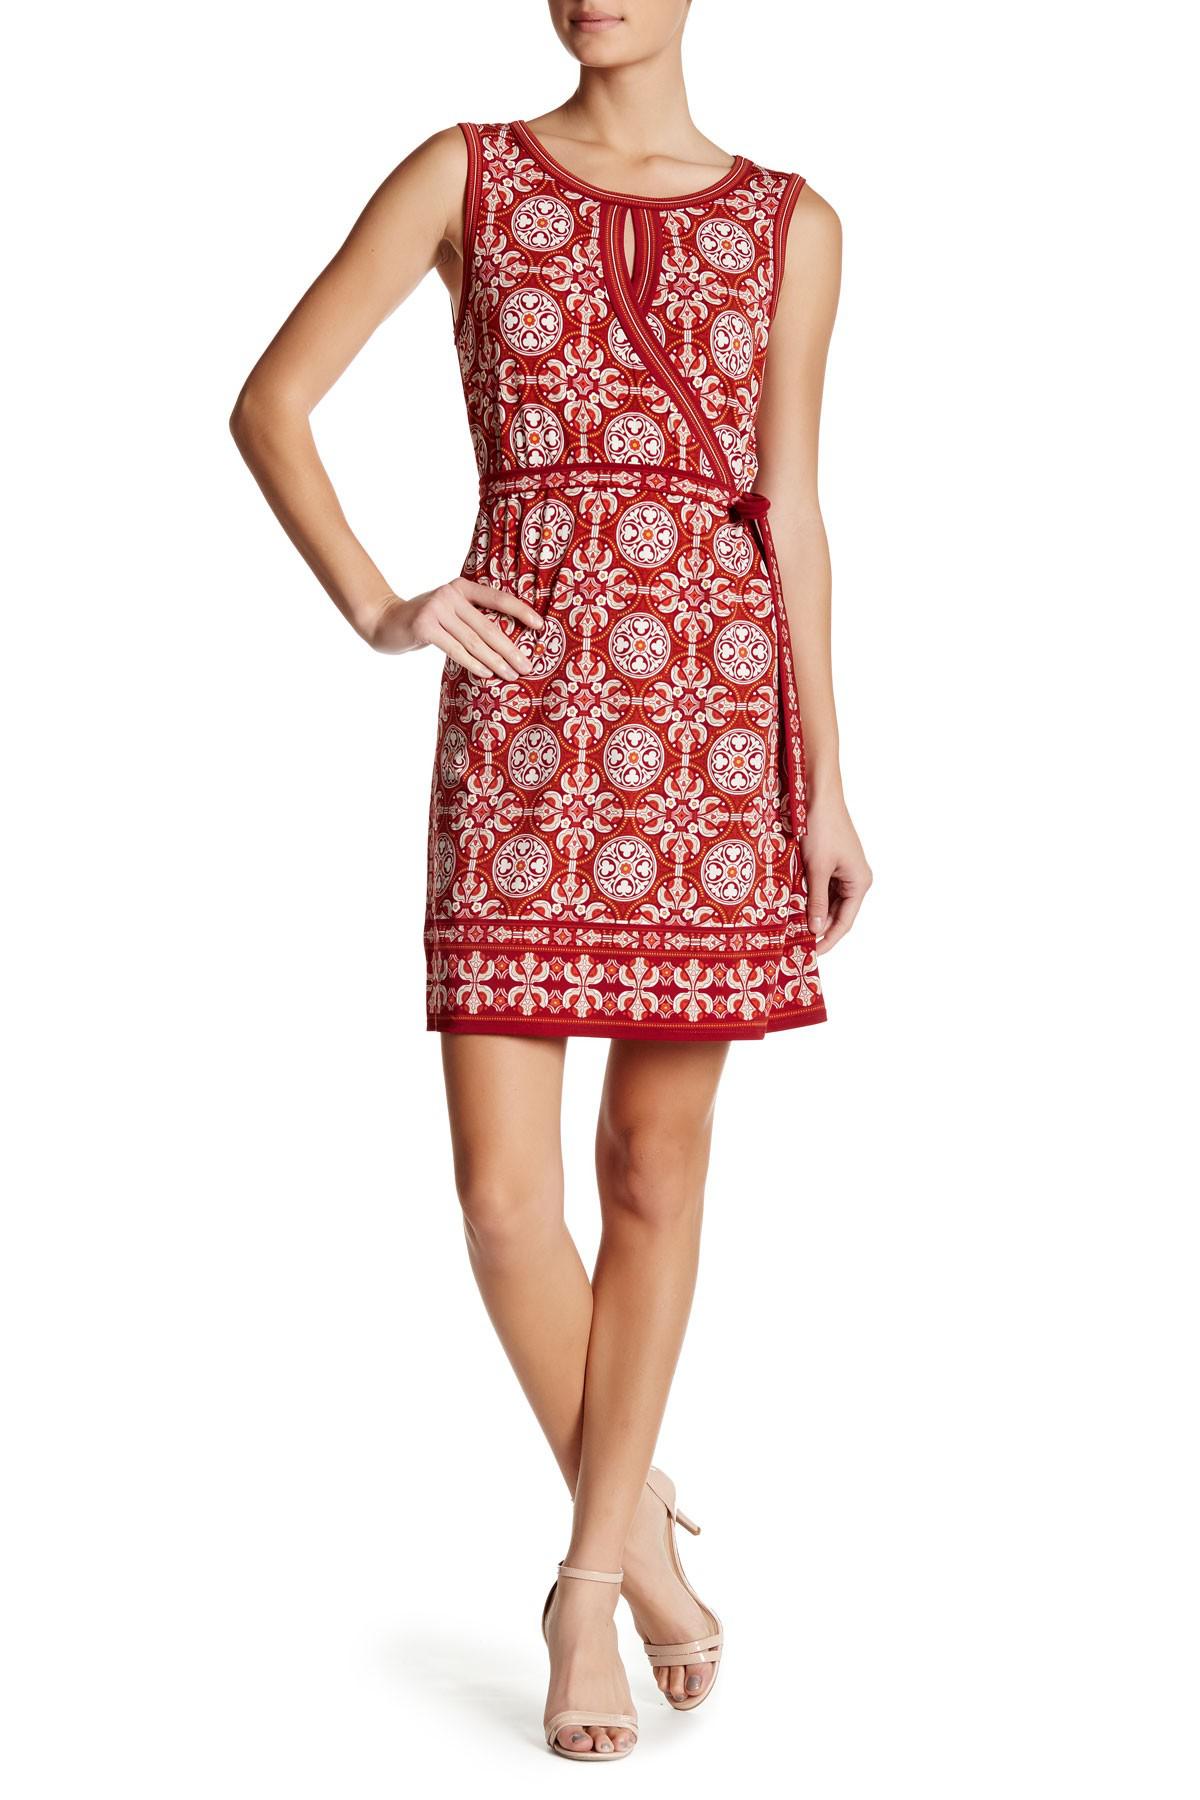 Lyst - Max Studio Sleeveless Keyhole Printed Dress in Red